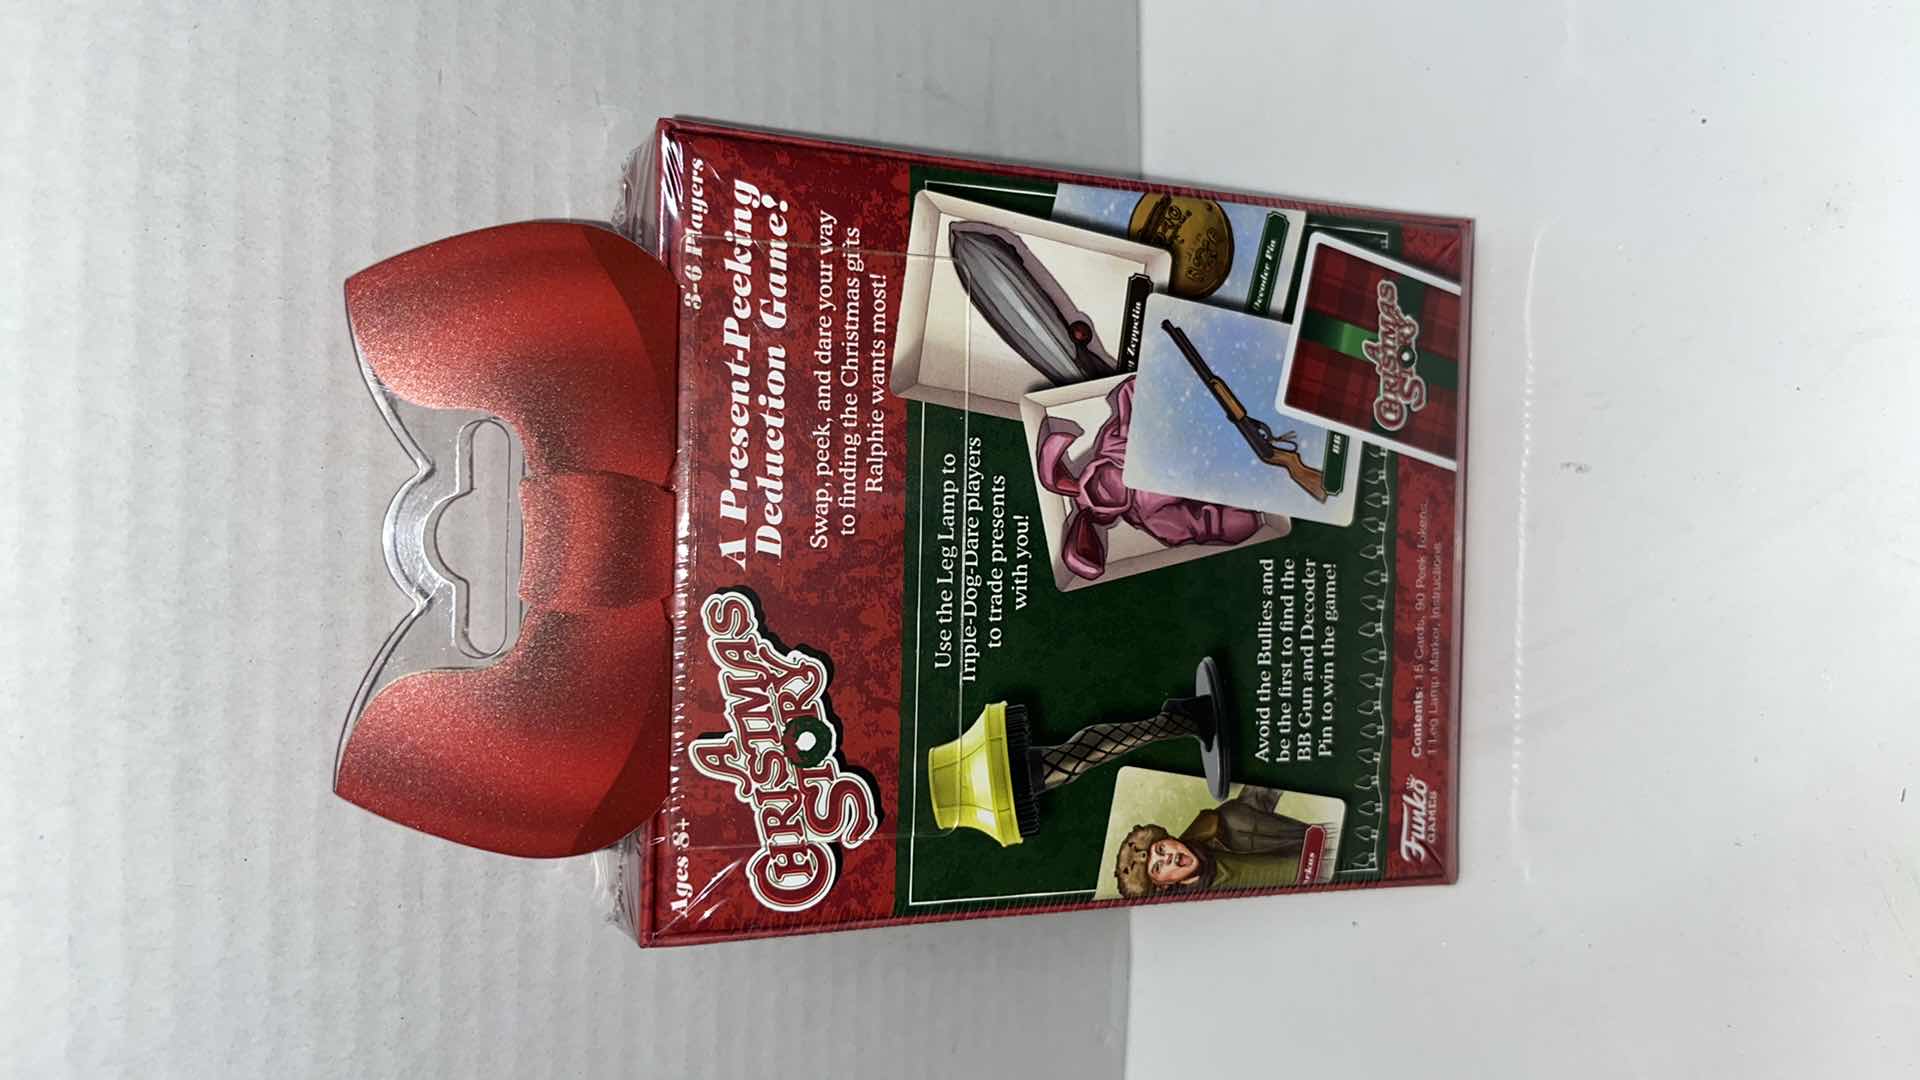 Photo 3 of BRAND NEW FUNKO GAMES A CHRISTMAS STORY “A MAJOR CARD GAME” & NECA A CHRISTMAS STORY LEG LAMP TALKING KEYCHAIN (2)